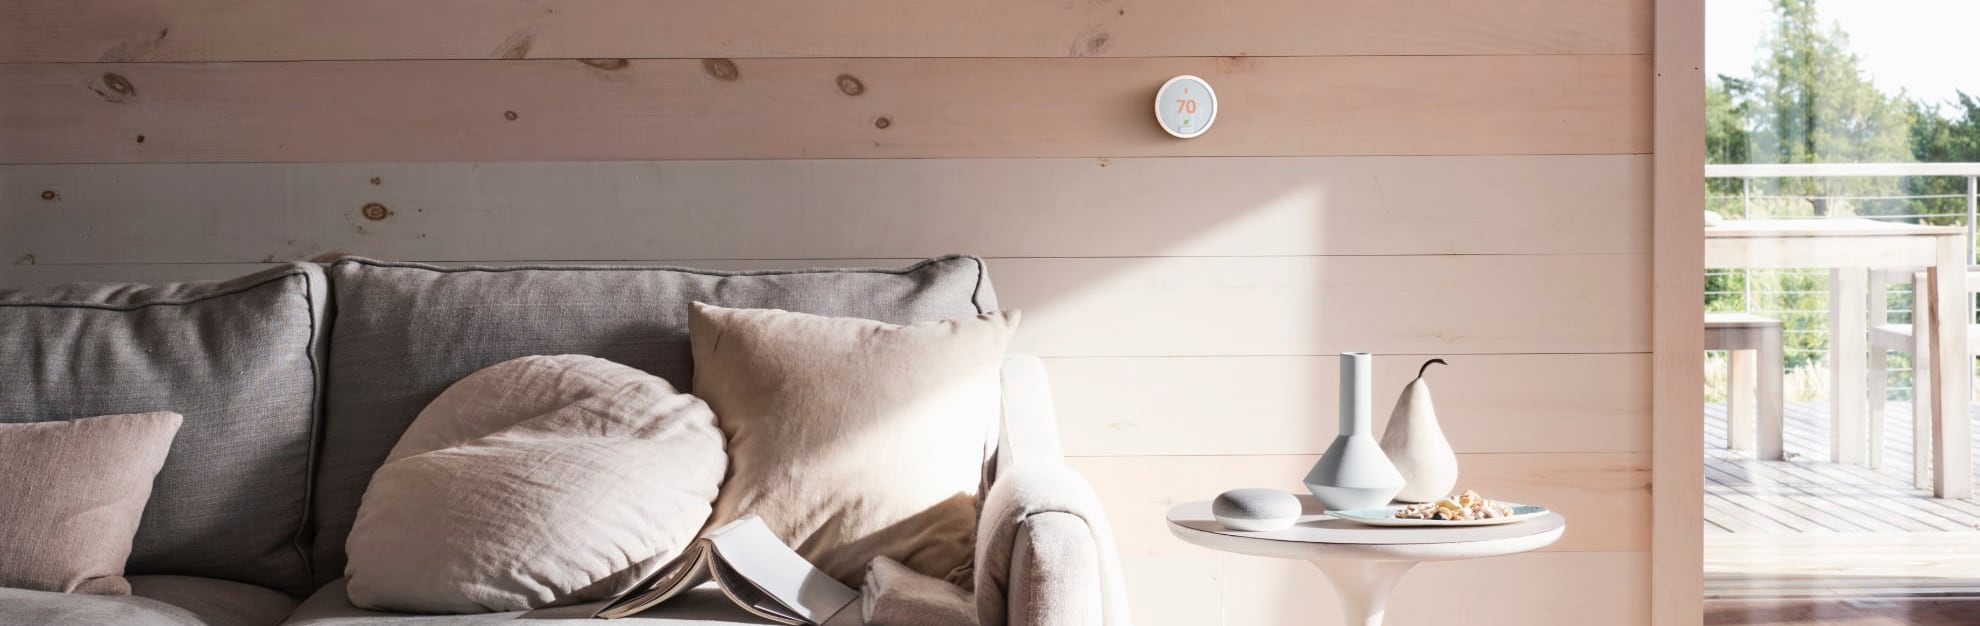 Vivint Home Automation in Stamford